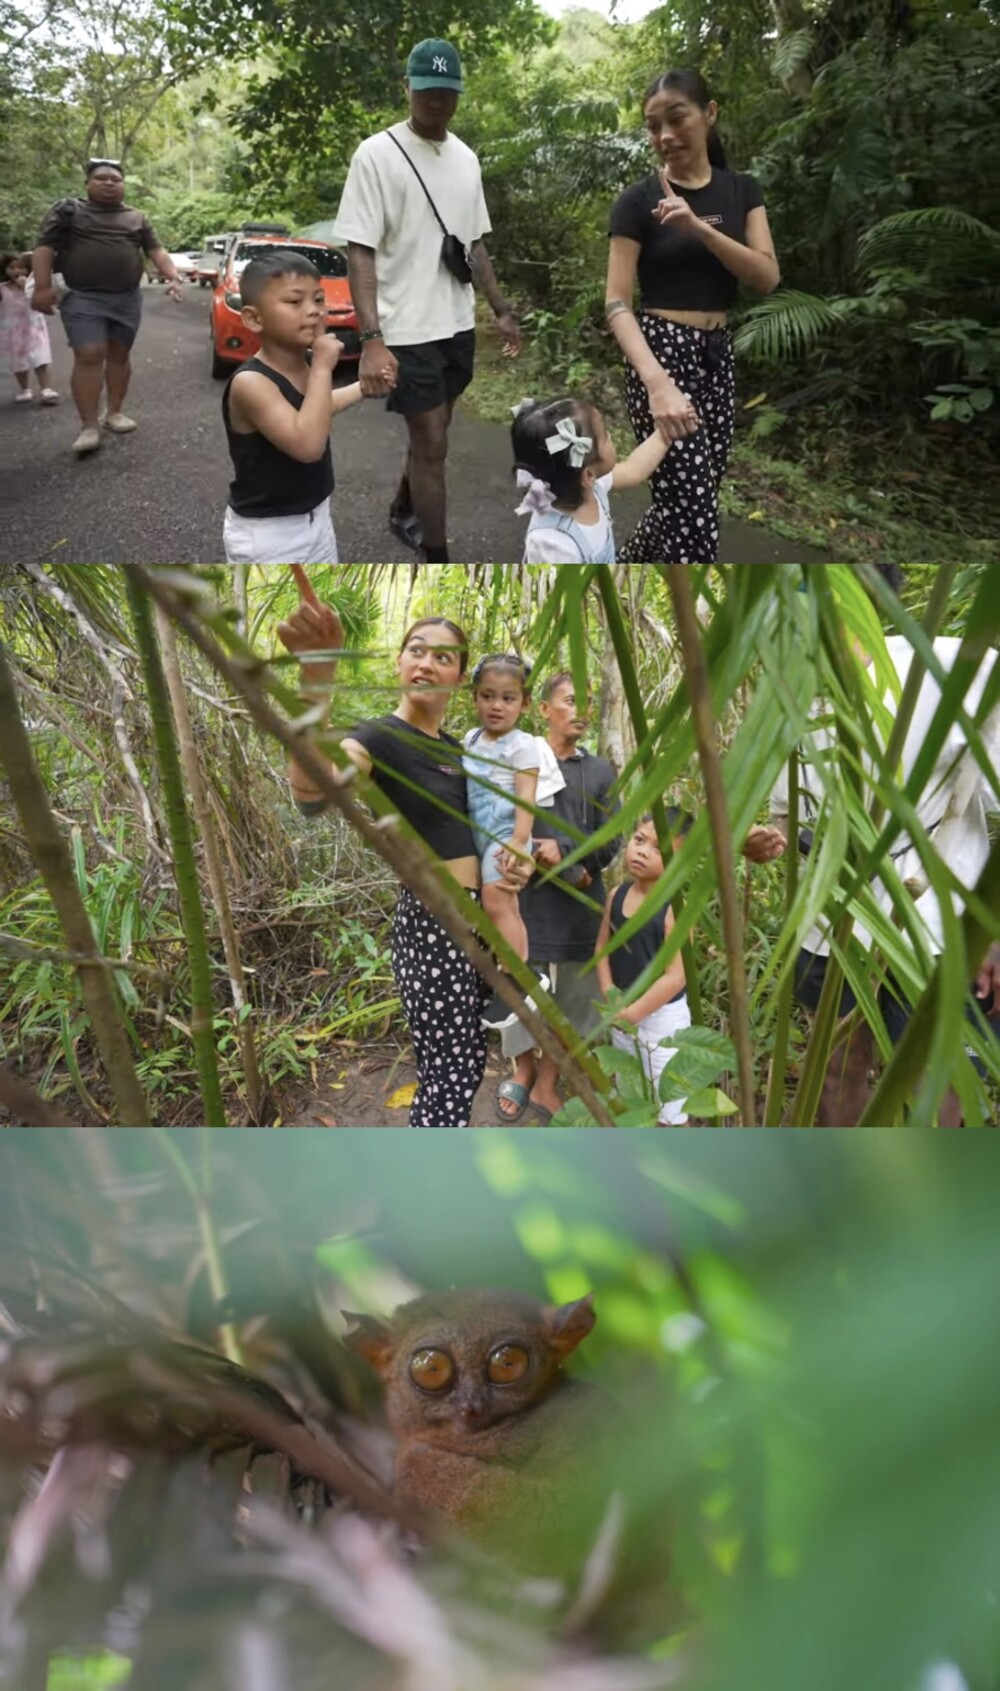 Zeinab Harake Bohol vacation with kids Lucas and Bia, and her partner Bobby Ray Parks Jr. | Philippine Tarsier Foundation's Tarsier Sanctuary